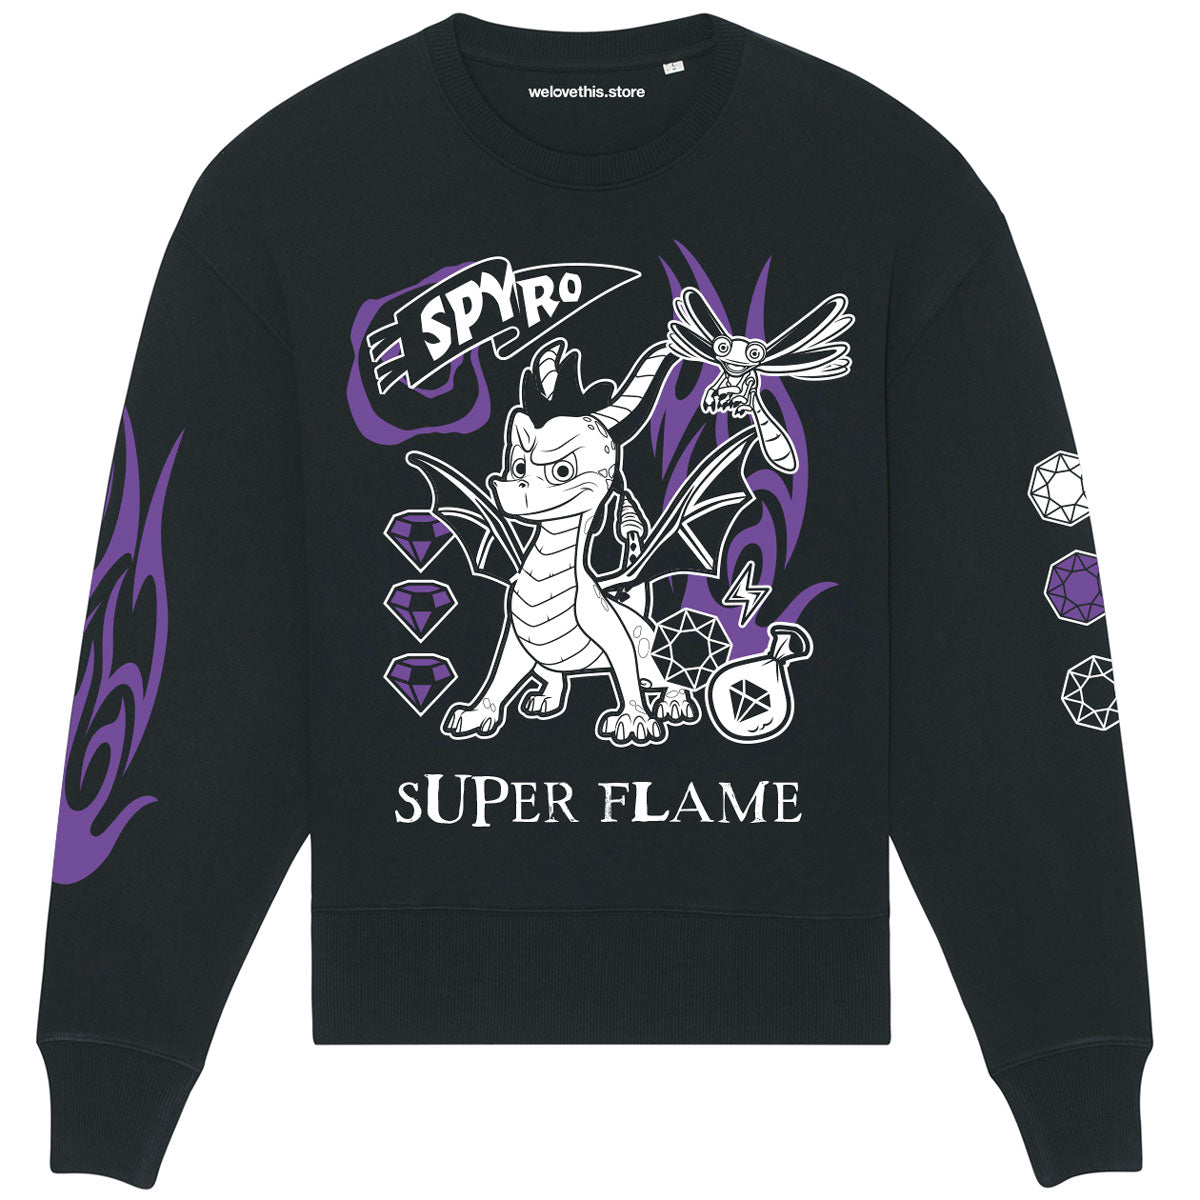 Spyro the Dragon Super Flame Sweatwhirt with Sleeve Prints